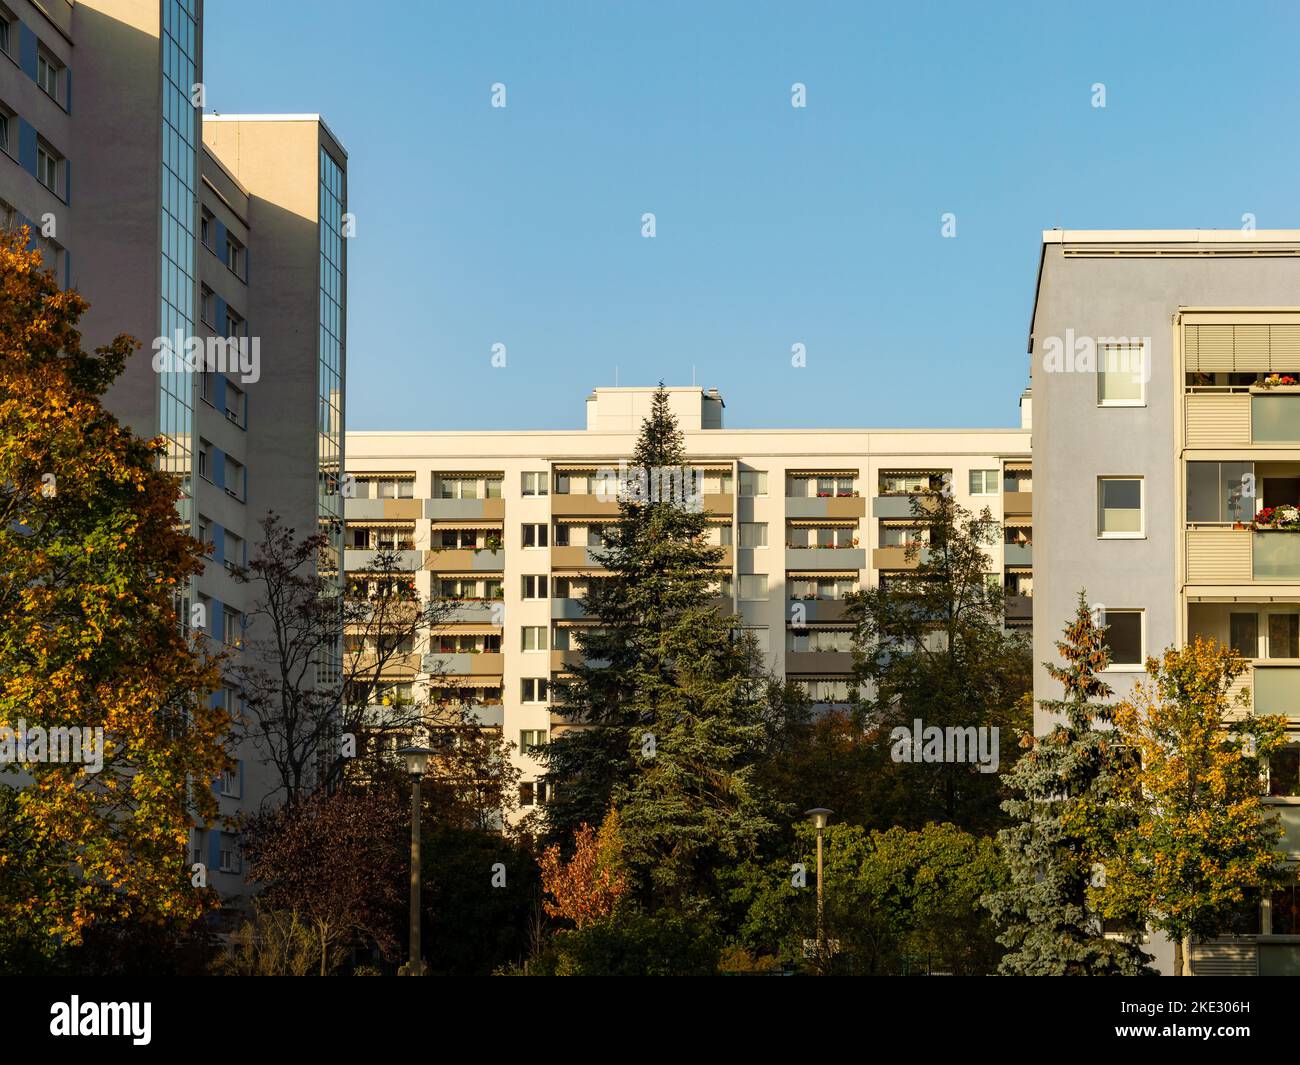 Apartment buildings in a residential area. Balconies are on the exterior. Prefabricated houses are part of the architecture in East Germany. Stock Photo